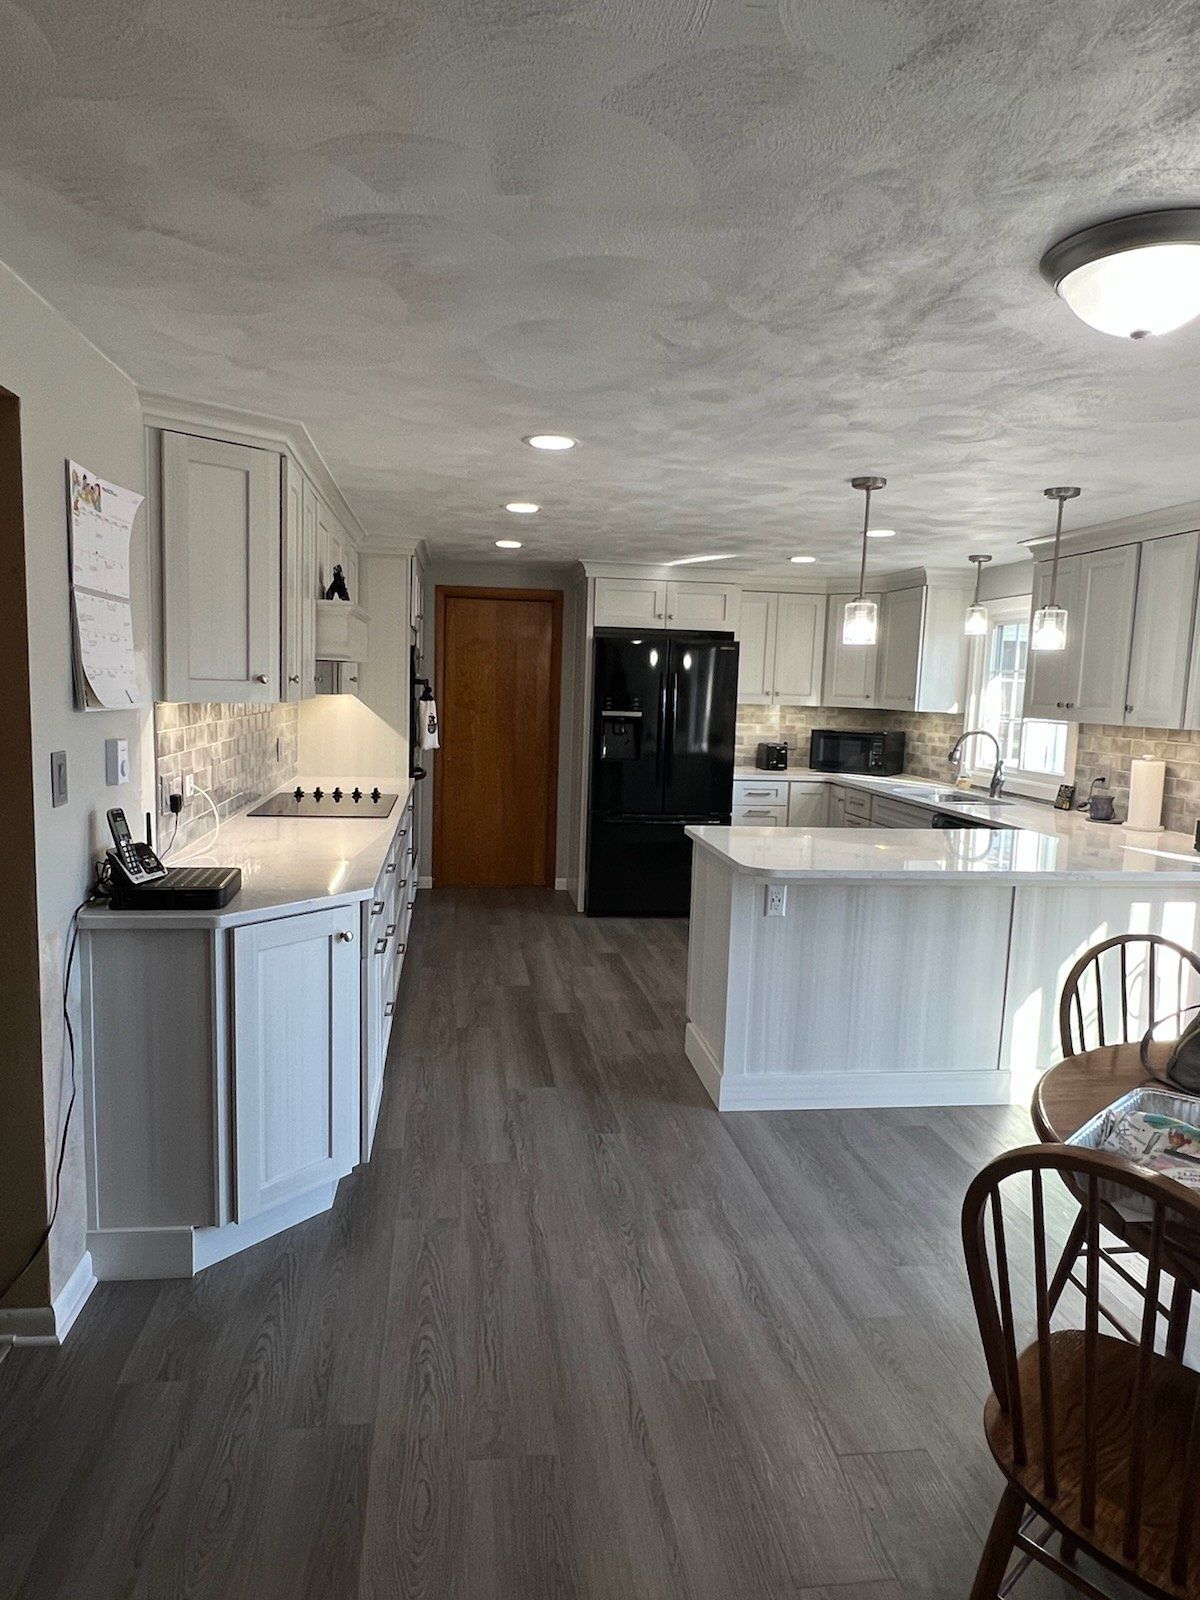 After Long View Kitchen - Kitchen Remodeling in Celina, OH